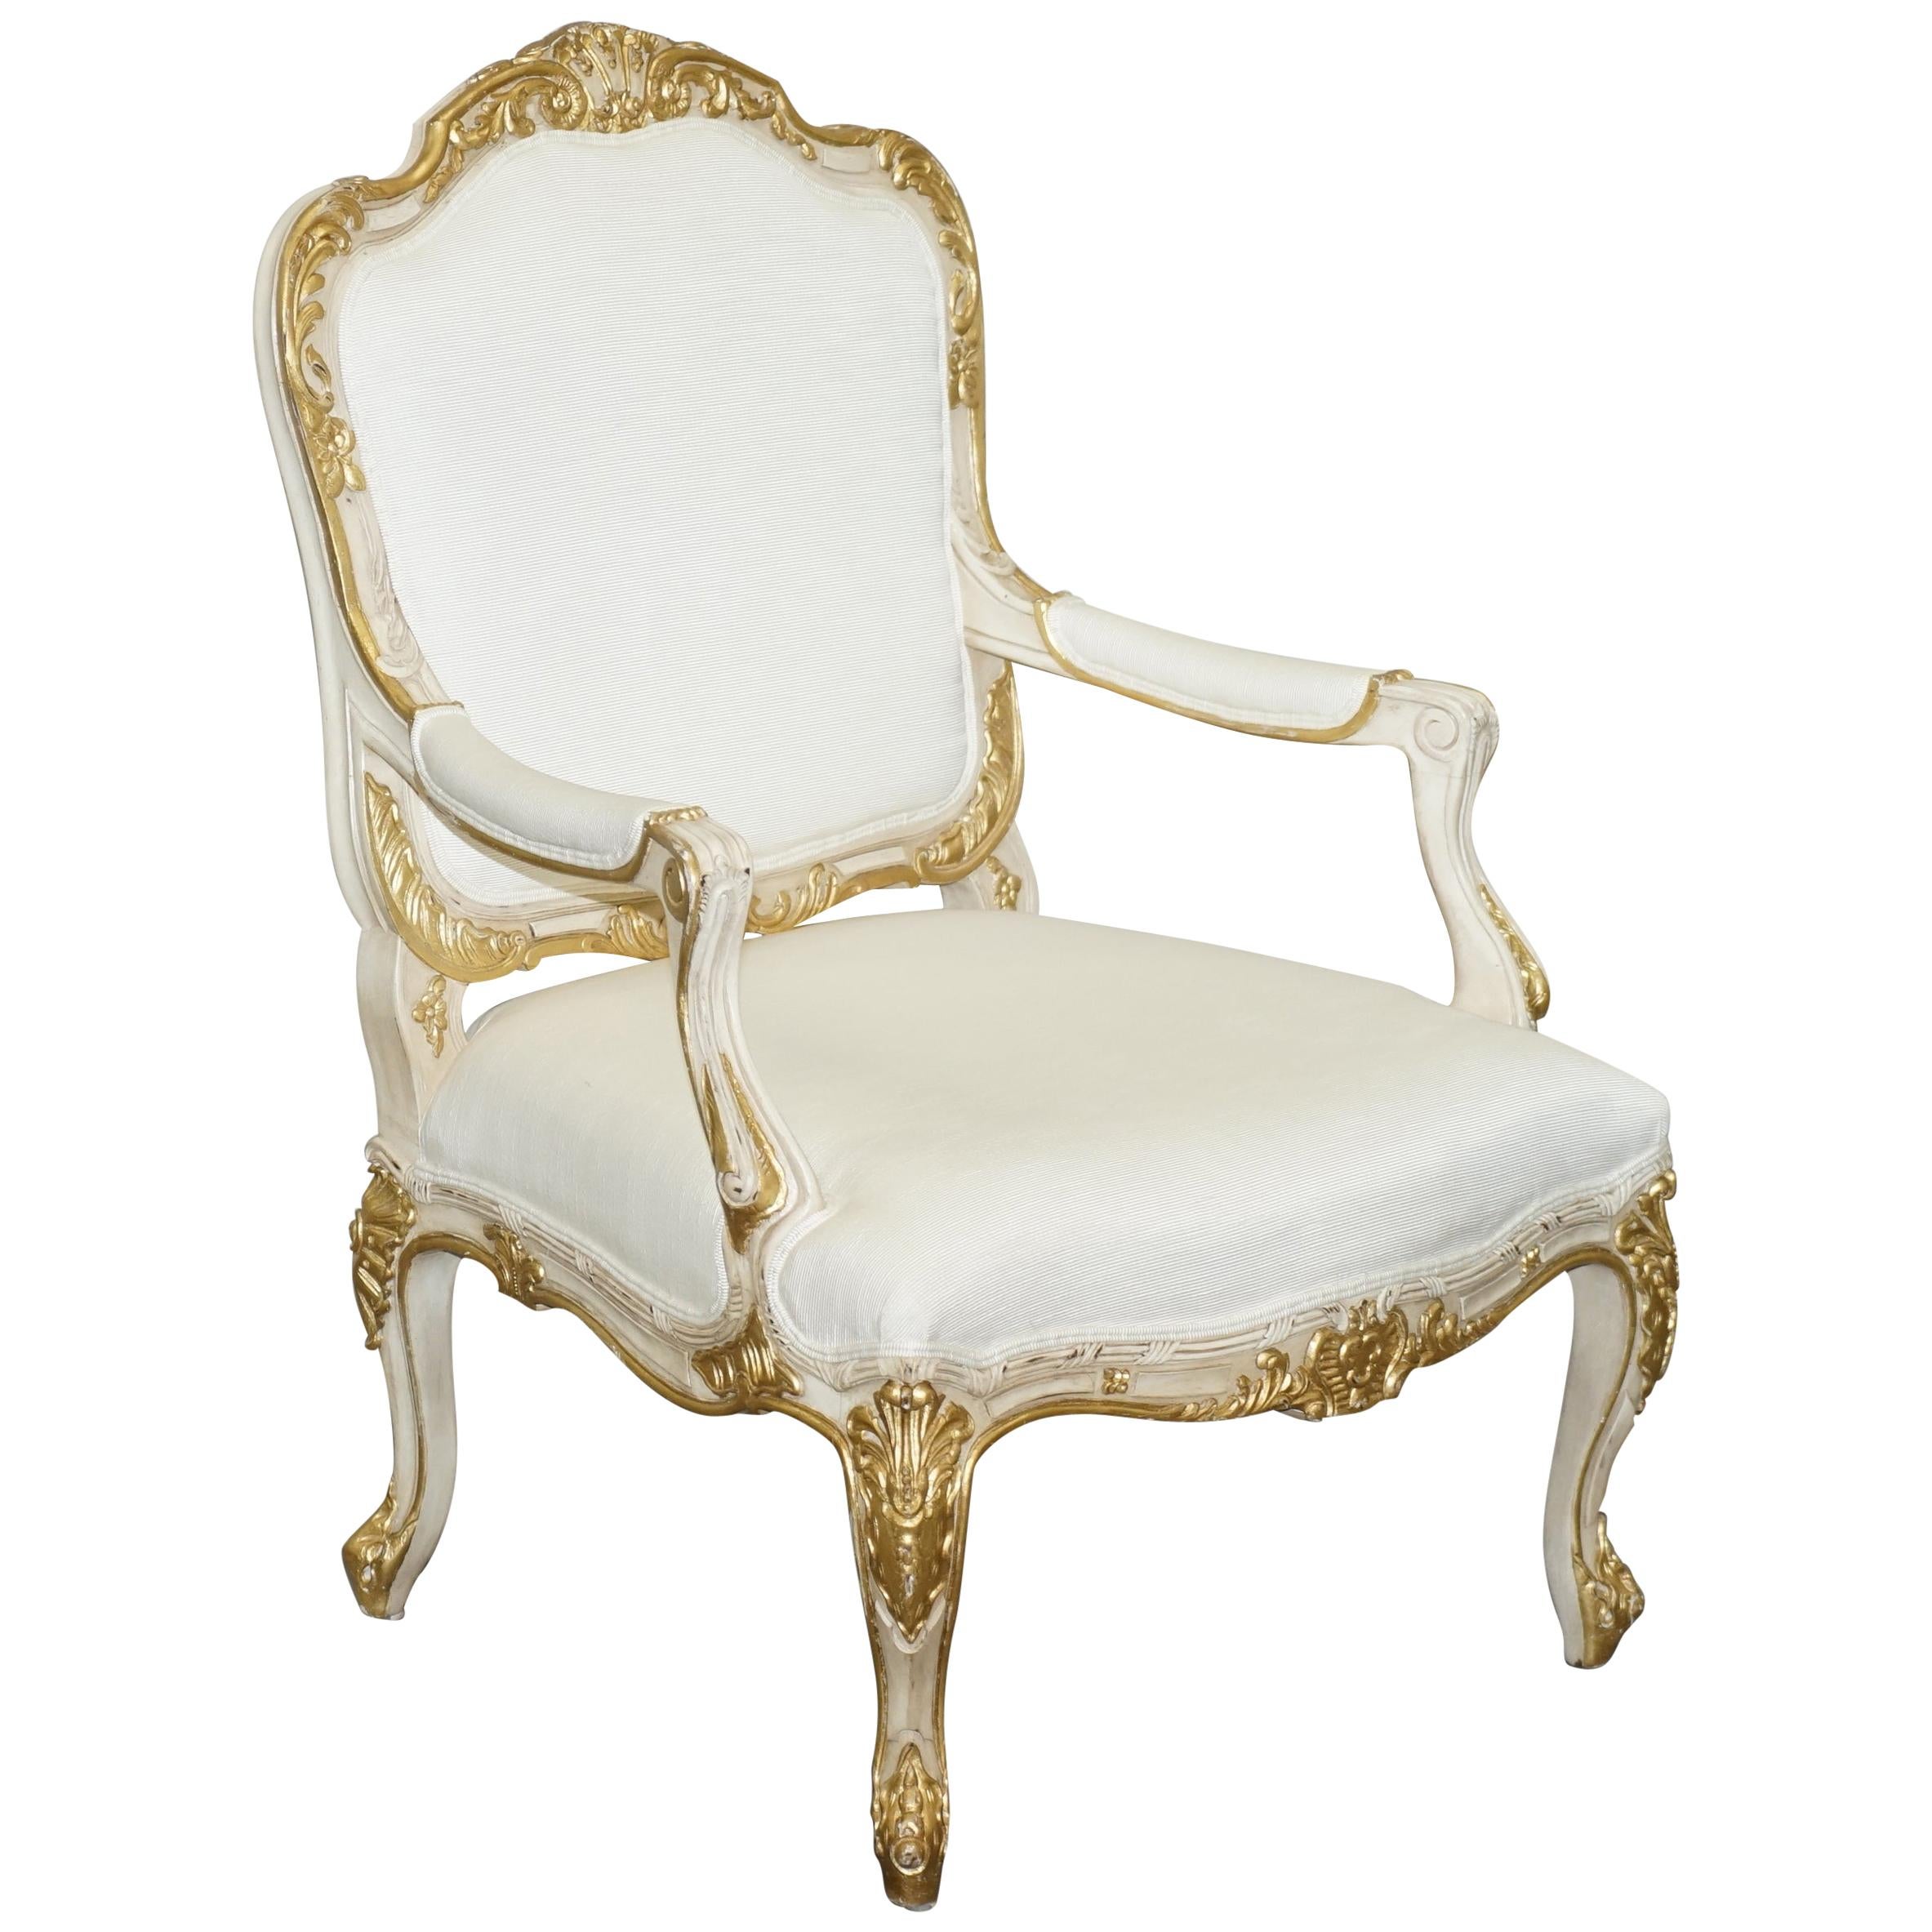 Sublime Ralph Lauren Indian Cove Lodge Fauteuil from the Cannes Estate  Suite For Sale at 1stDibs